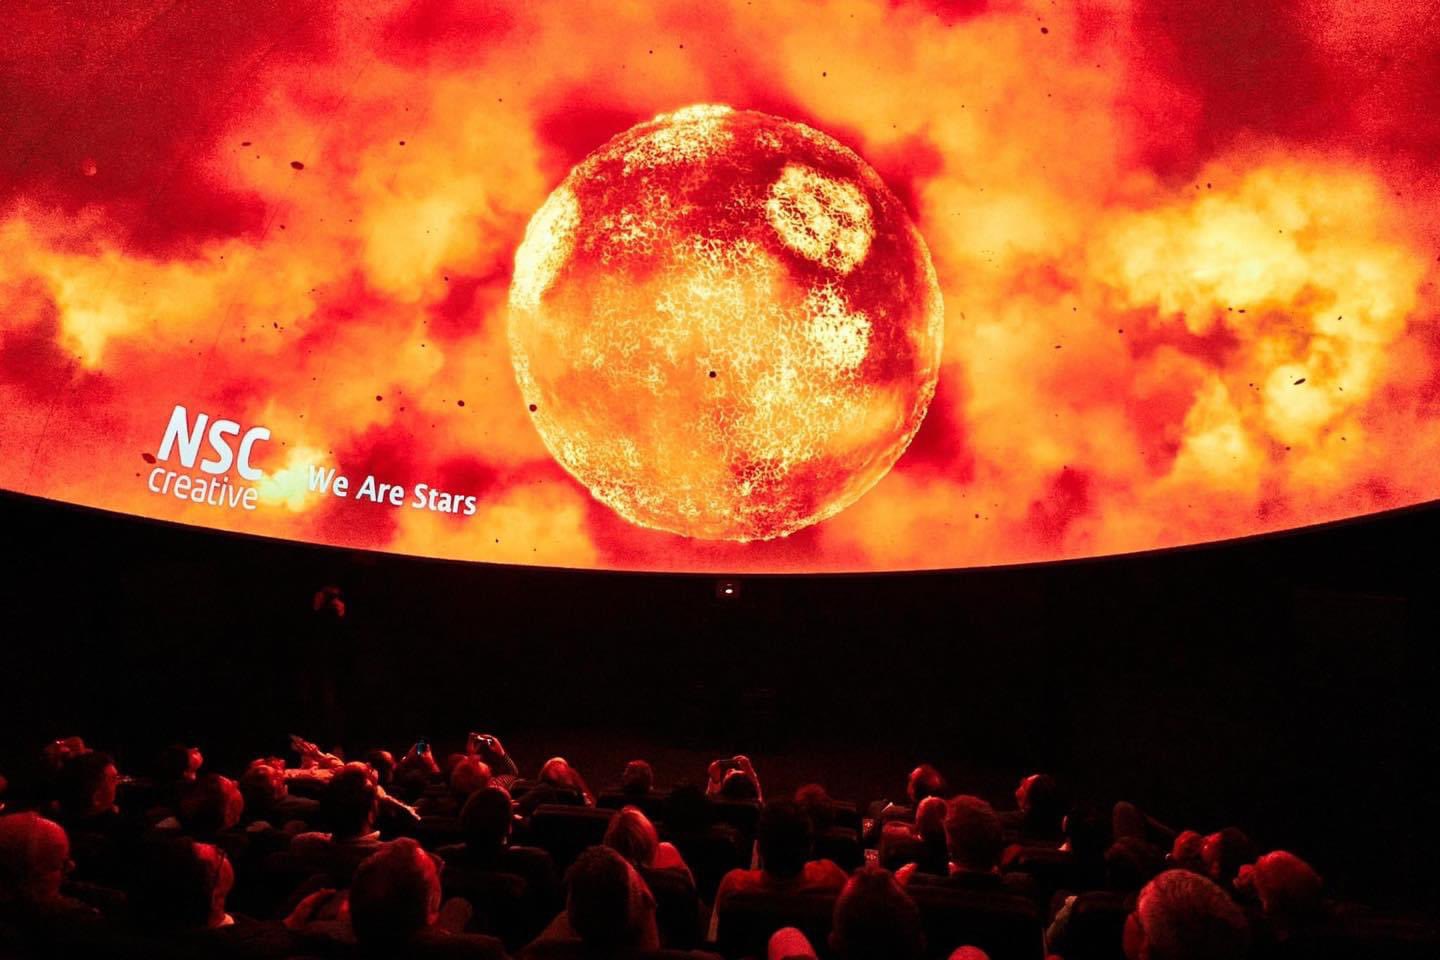 A new planetarium can be found at the Marine Science Center in Szczecin